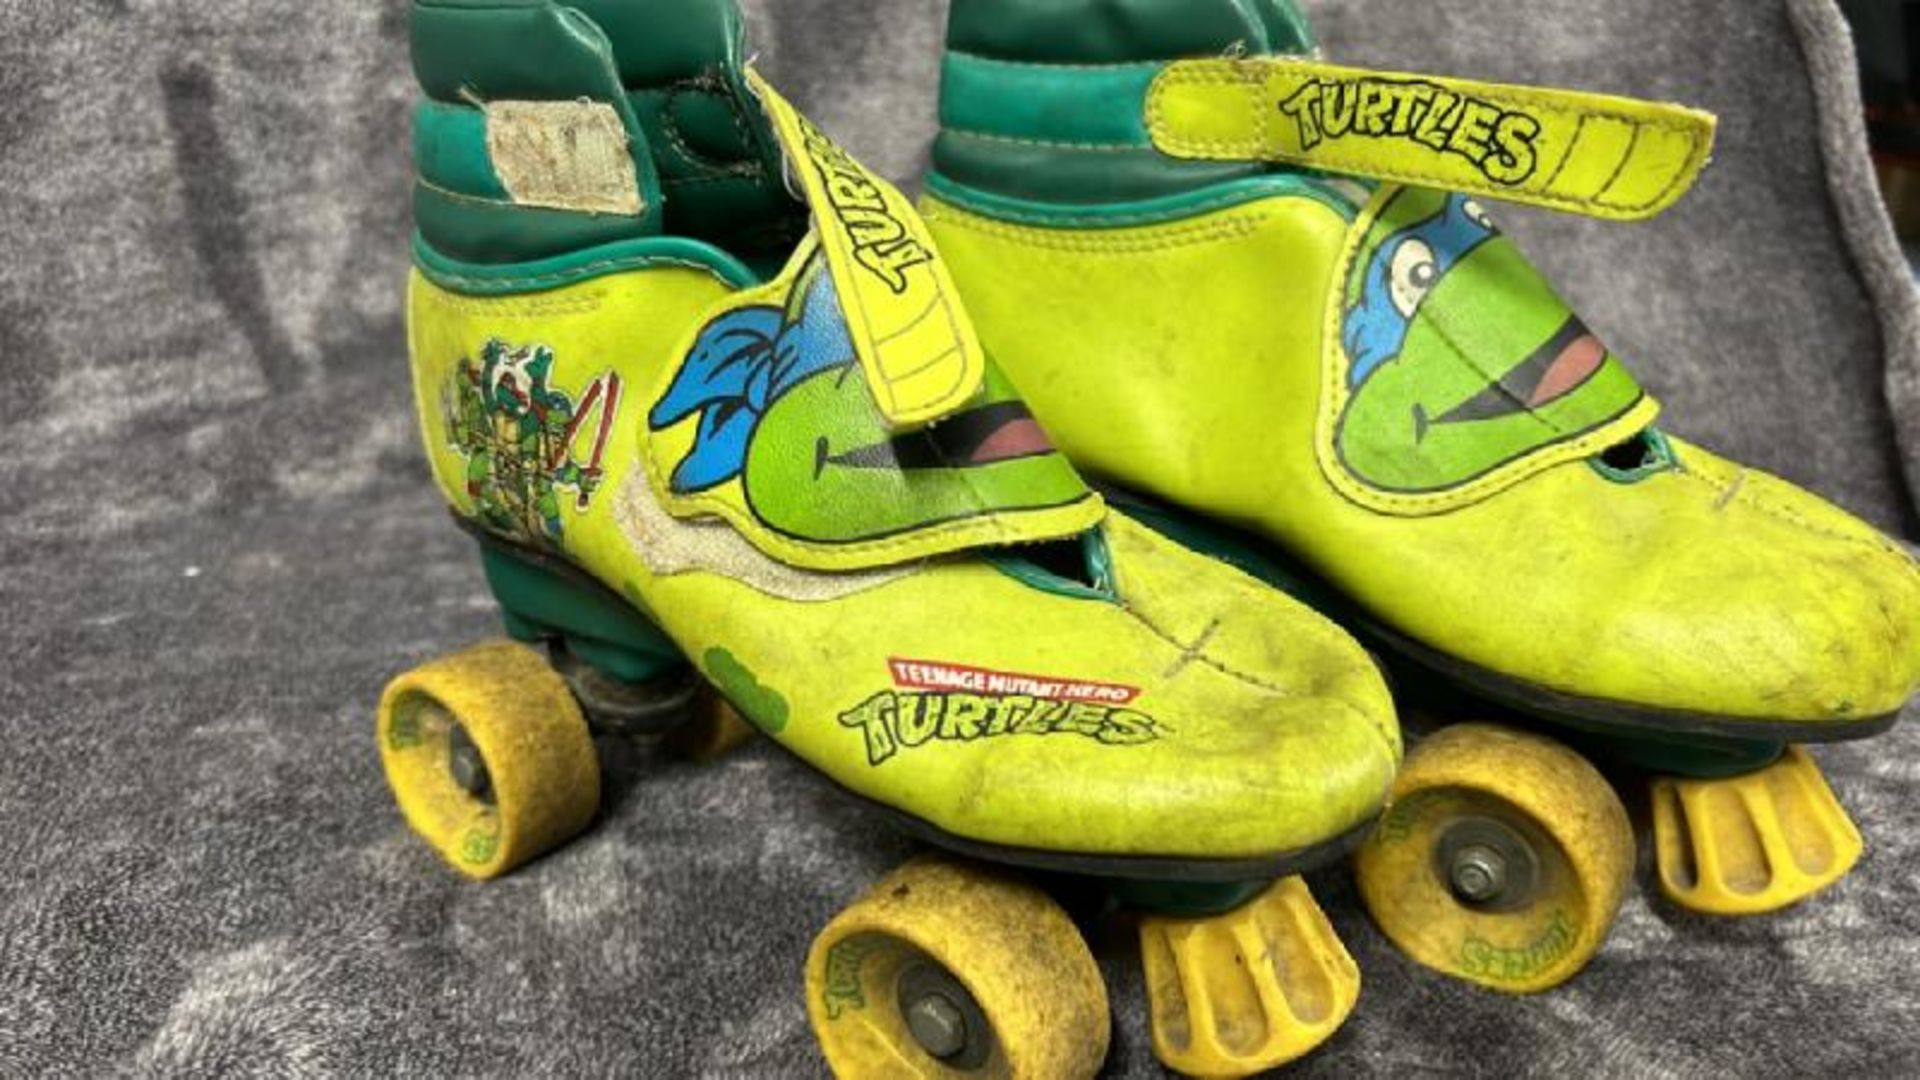 1990 Teenage Mutant Hero Turtles roller boots and Power Rangers roller blades from 1994 / AN43 - Image 3 of 6